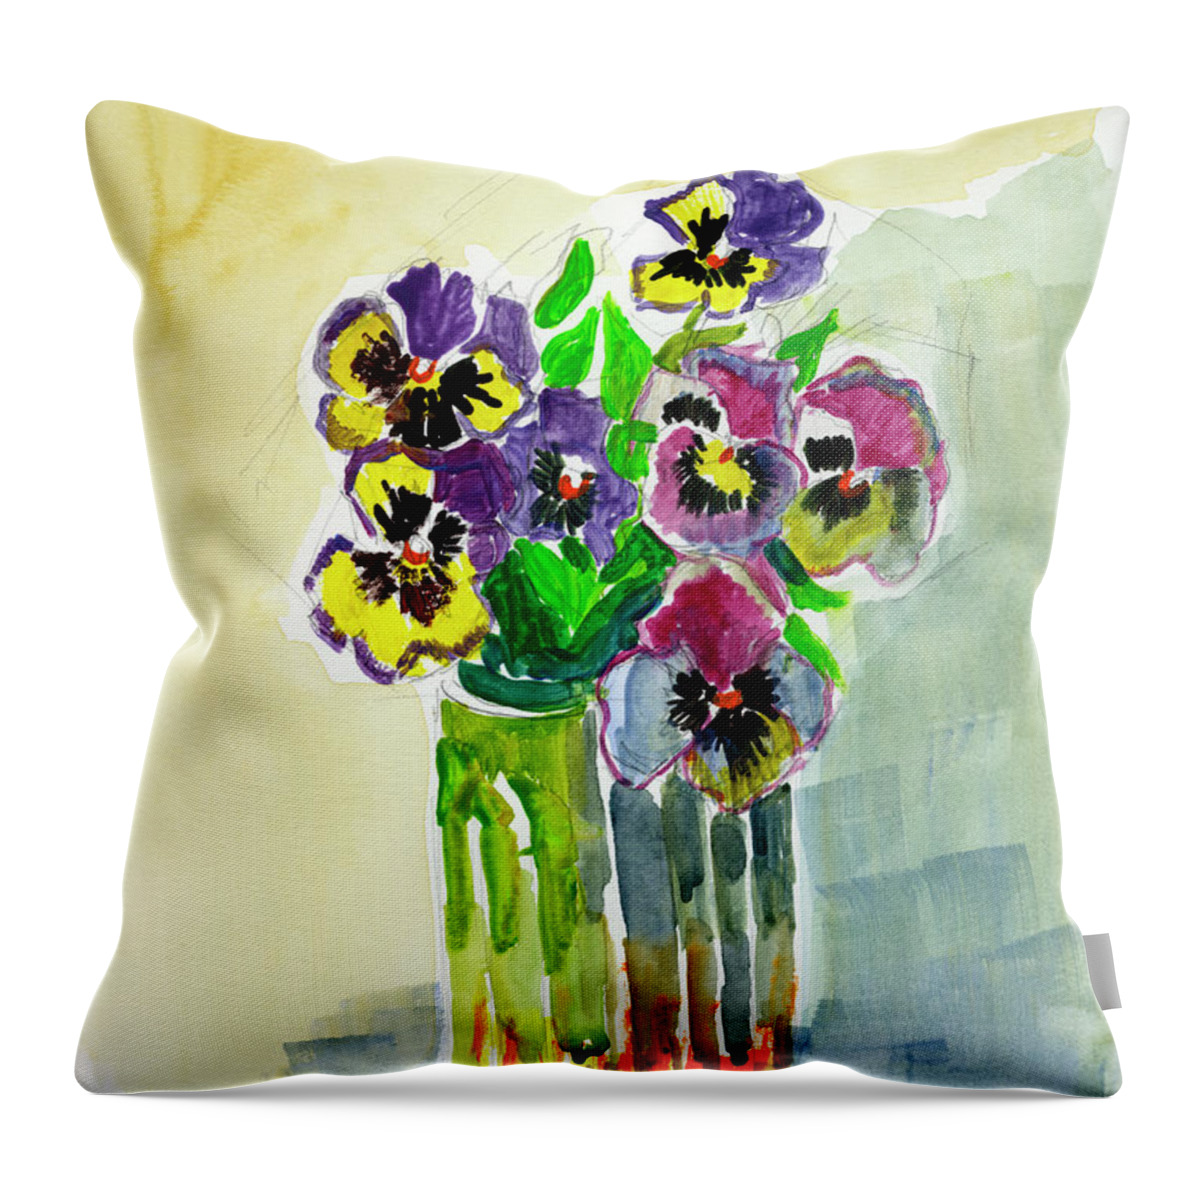 Still Life Throw Pillow featuring the painting Vase of Pansies by Diane McClary